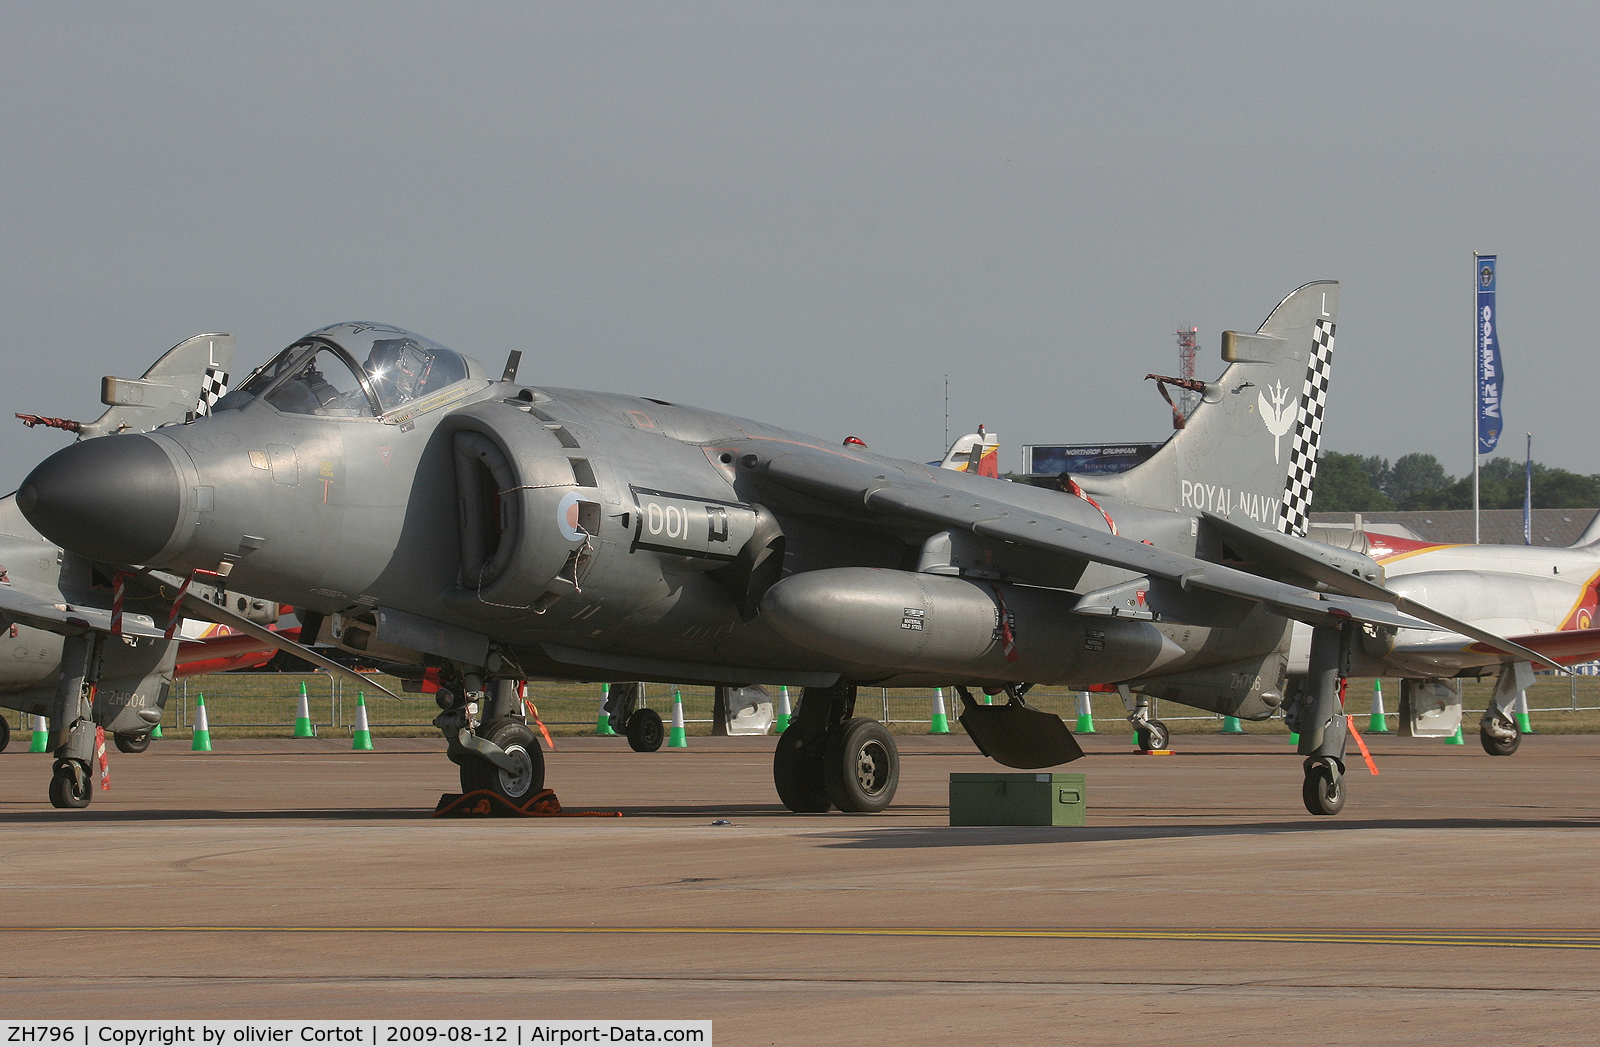 ZH796, 1995 British Aerospace Sea Harrier F/A.2 C/N NB01, On display at the RIAT 2005